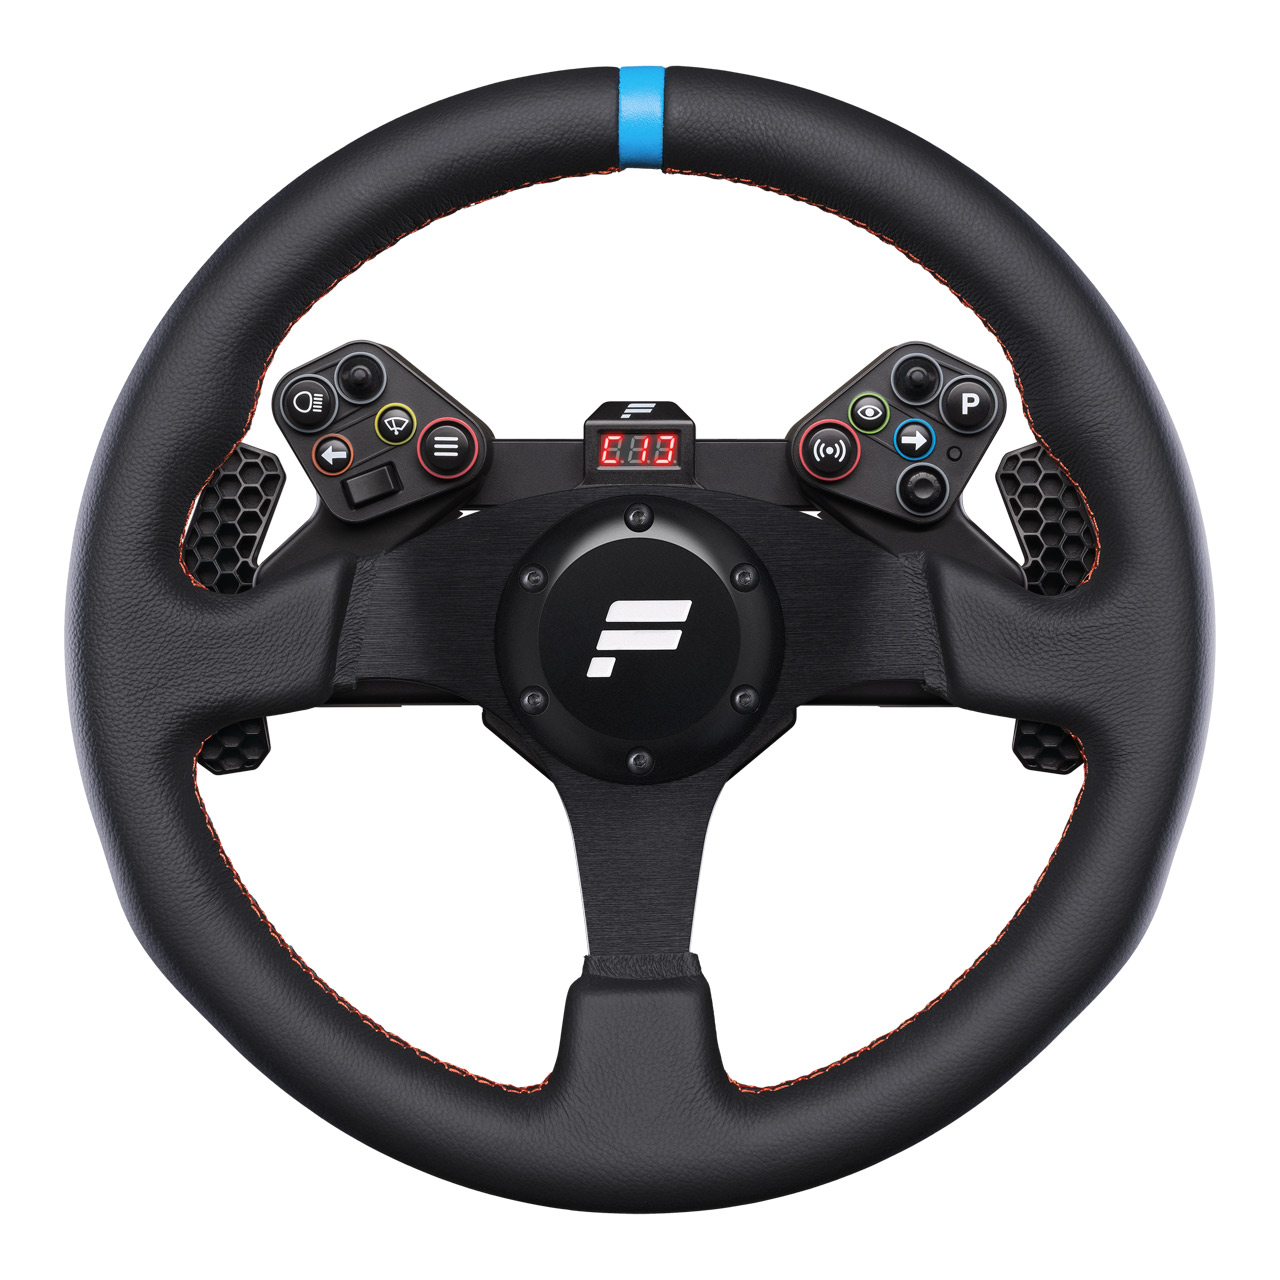 What does this mean? : r/Fanatec